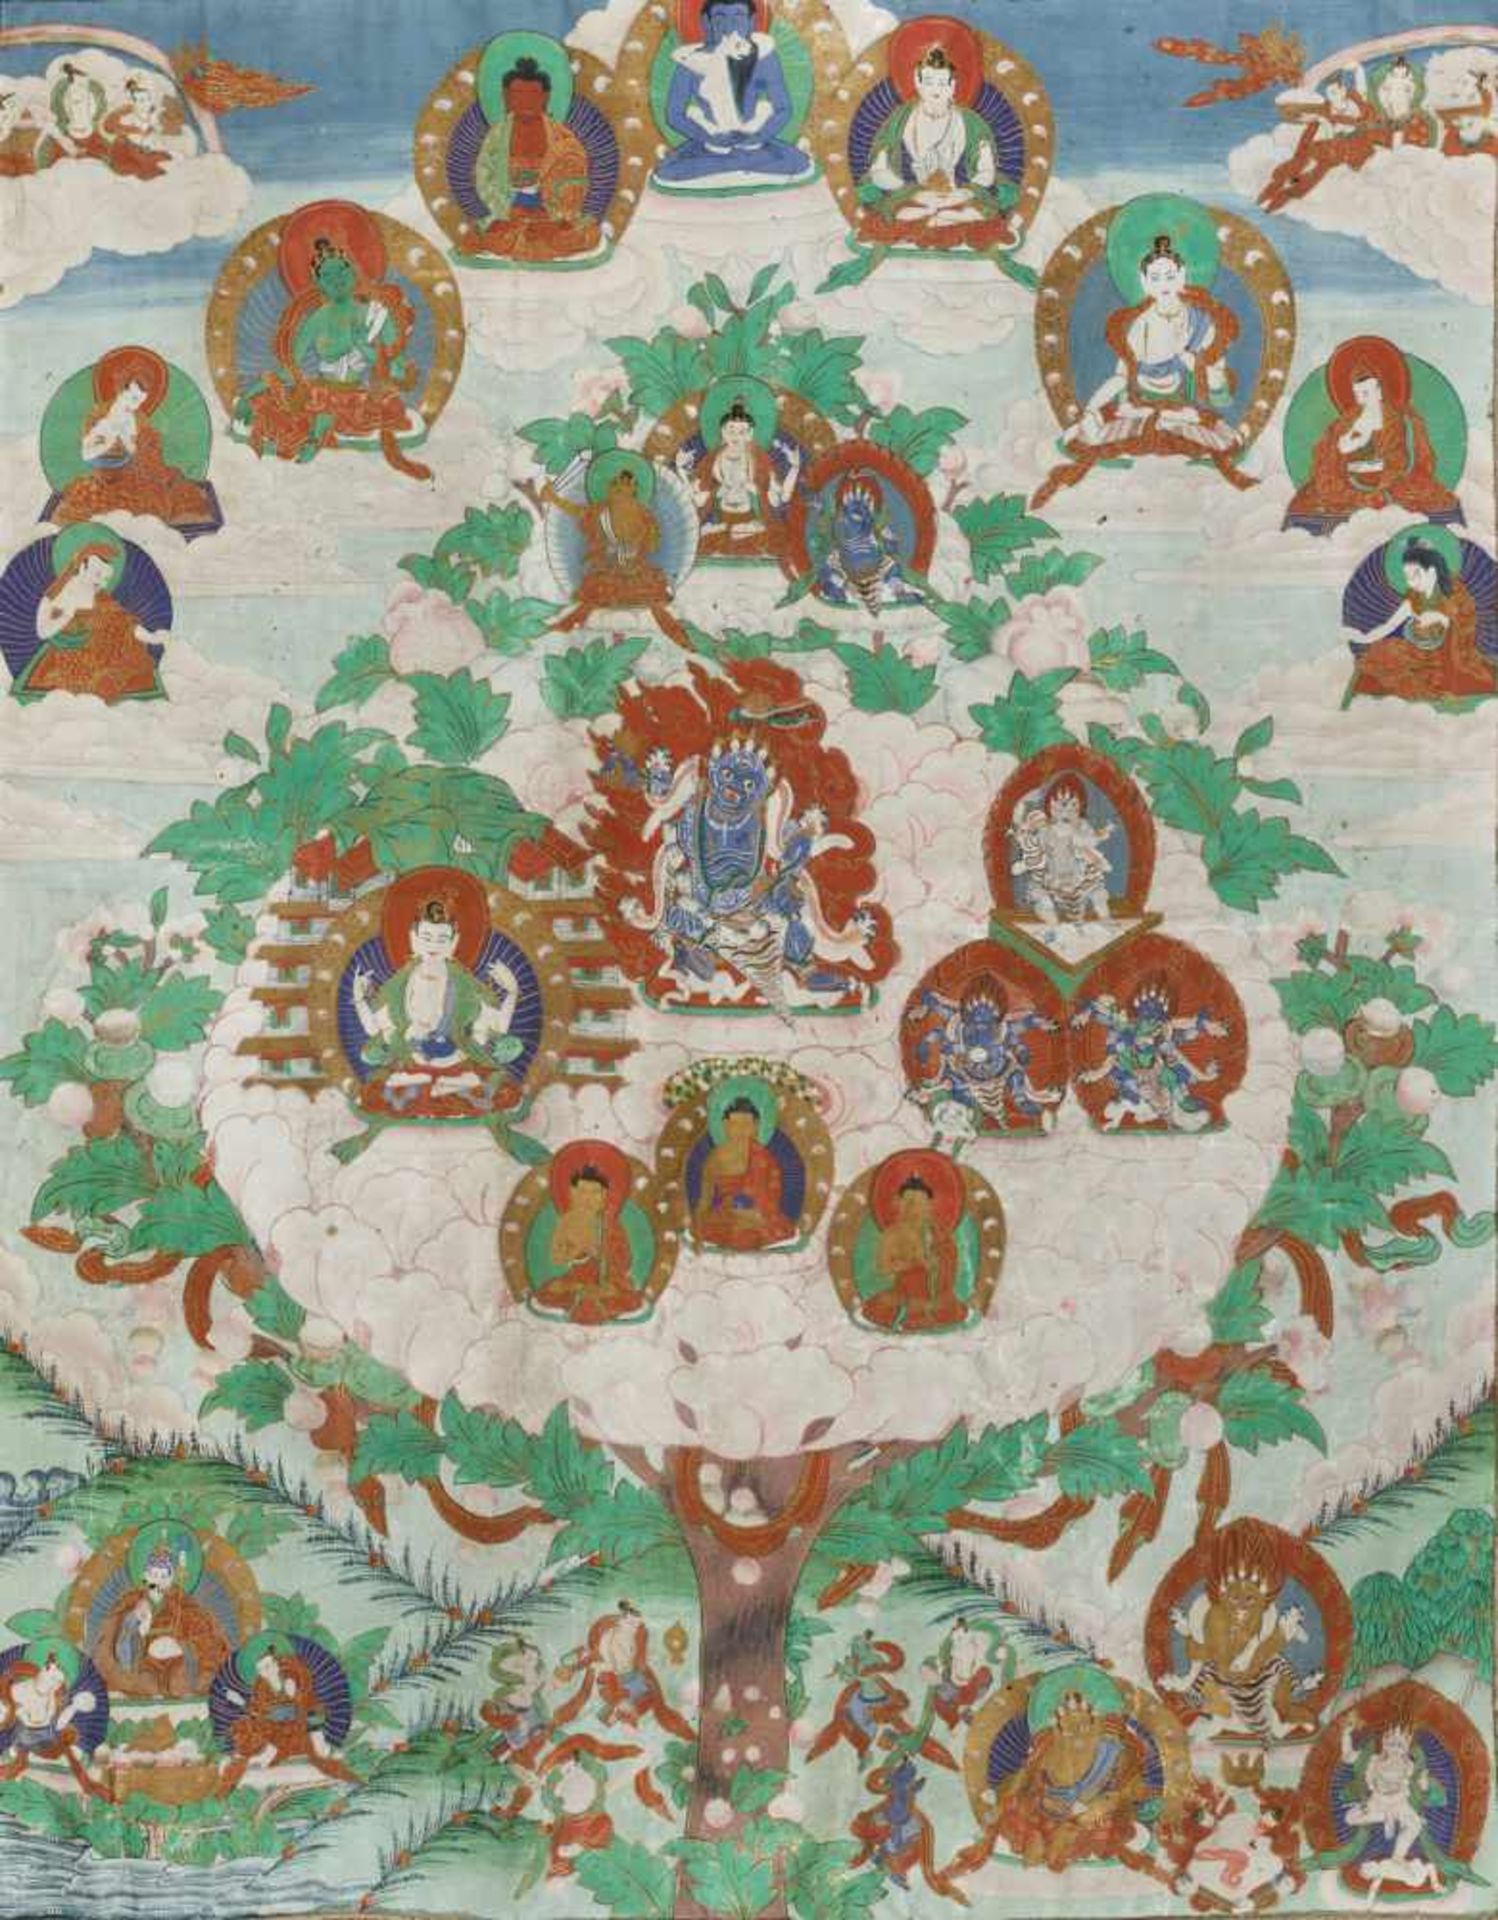 A FINE THANGKA WITH DEITIES IN LOTUS TREE Distemper and gold paint on cloth, framed by segmented